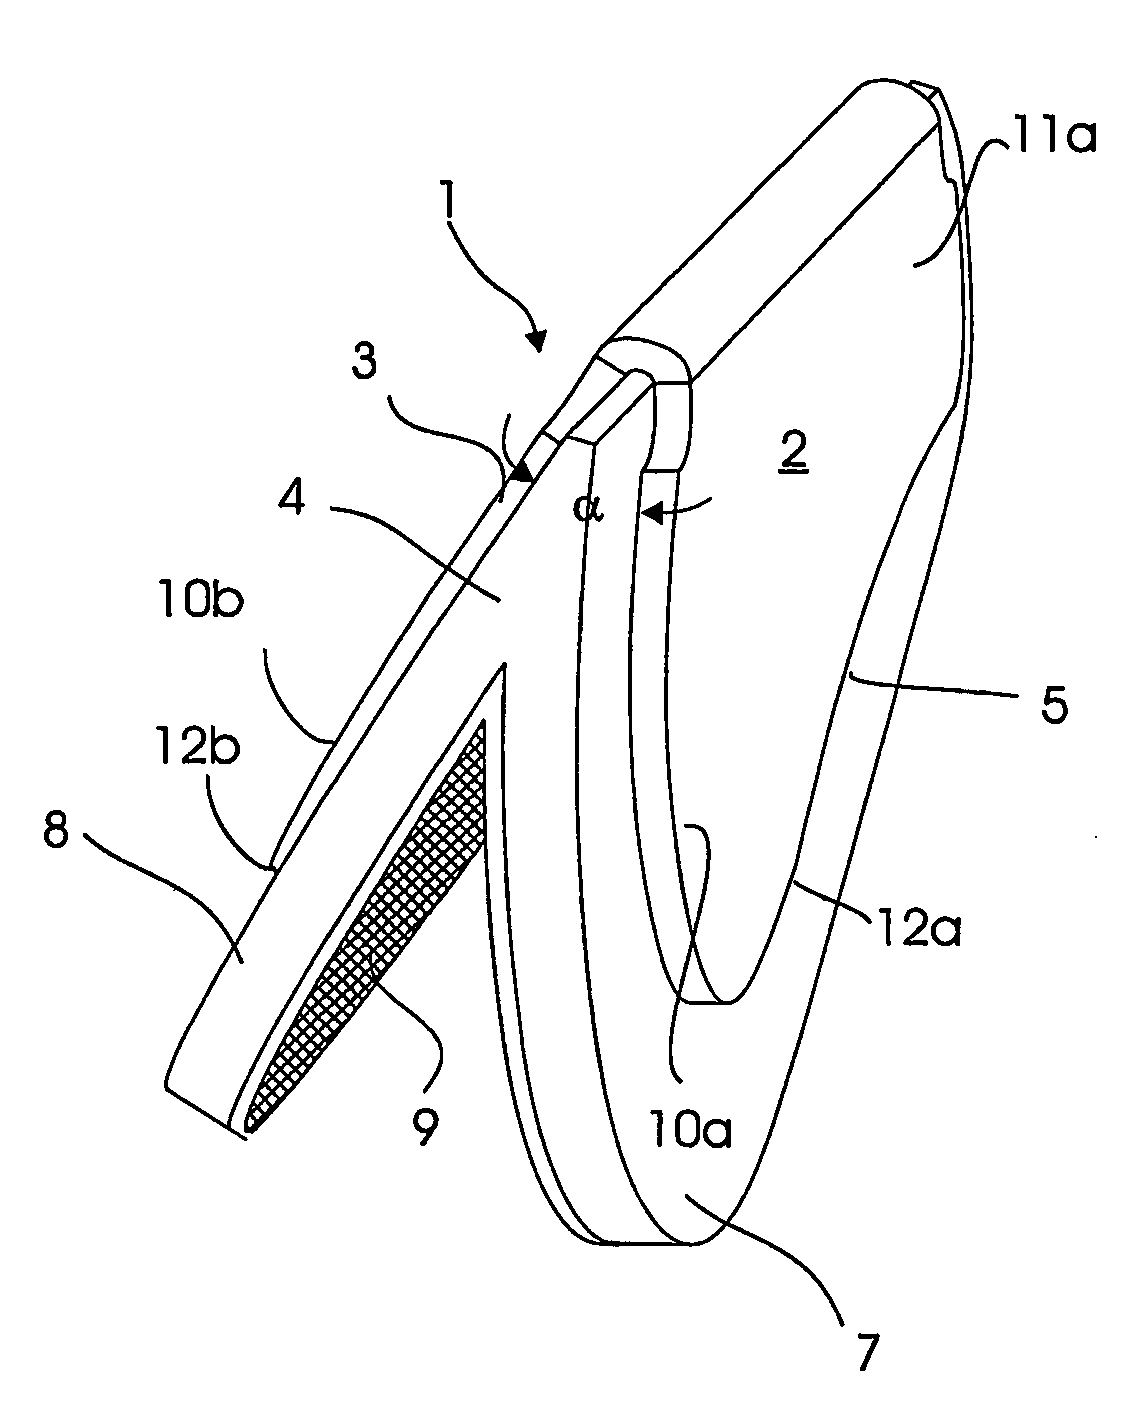 Clamp for correcting the external ear and method of using the clamp